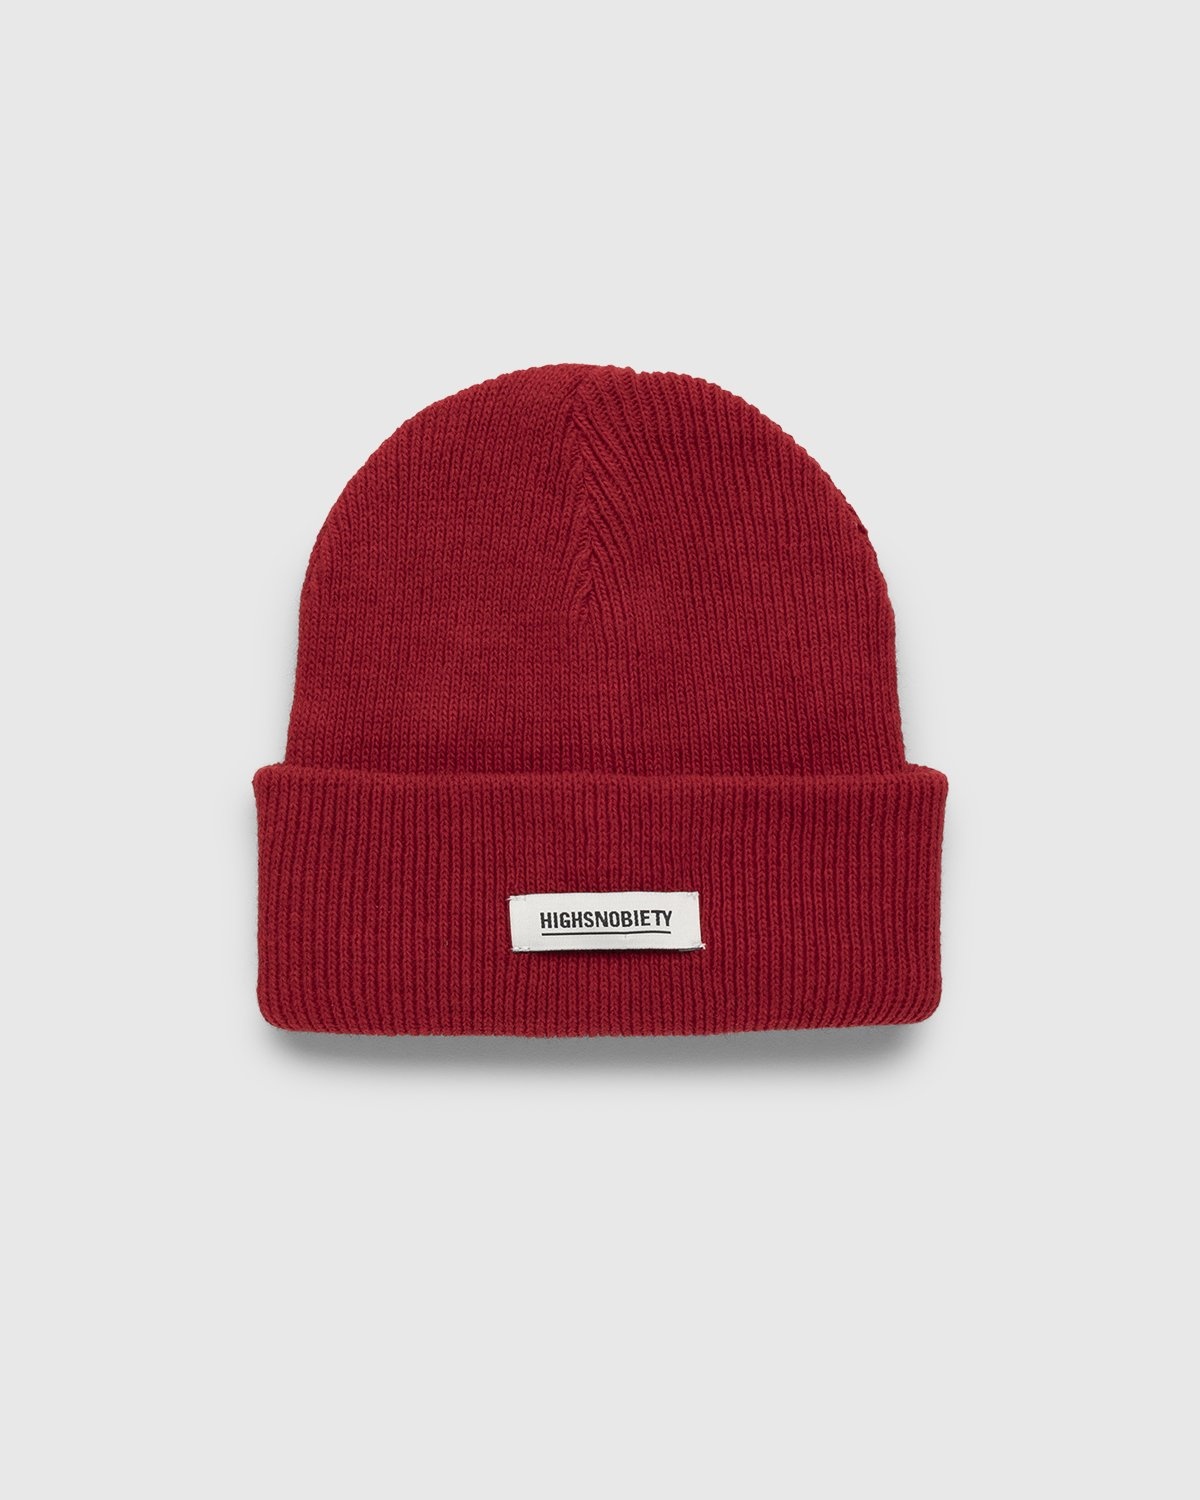 Highsnobiety – Watch Logo Staples Beanie Cardinal Red - Hats - Red - Image 1